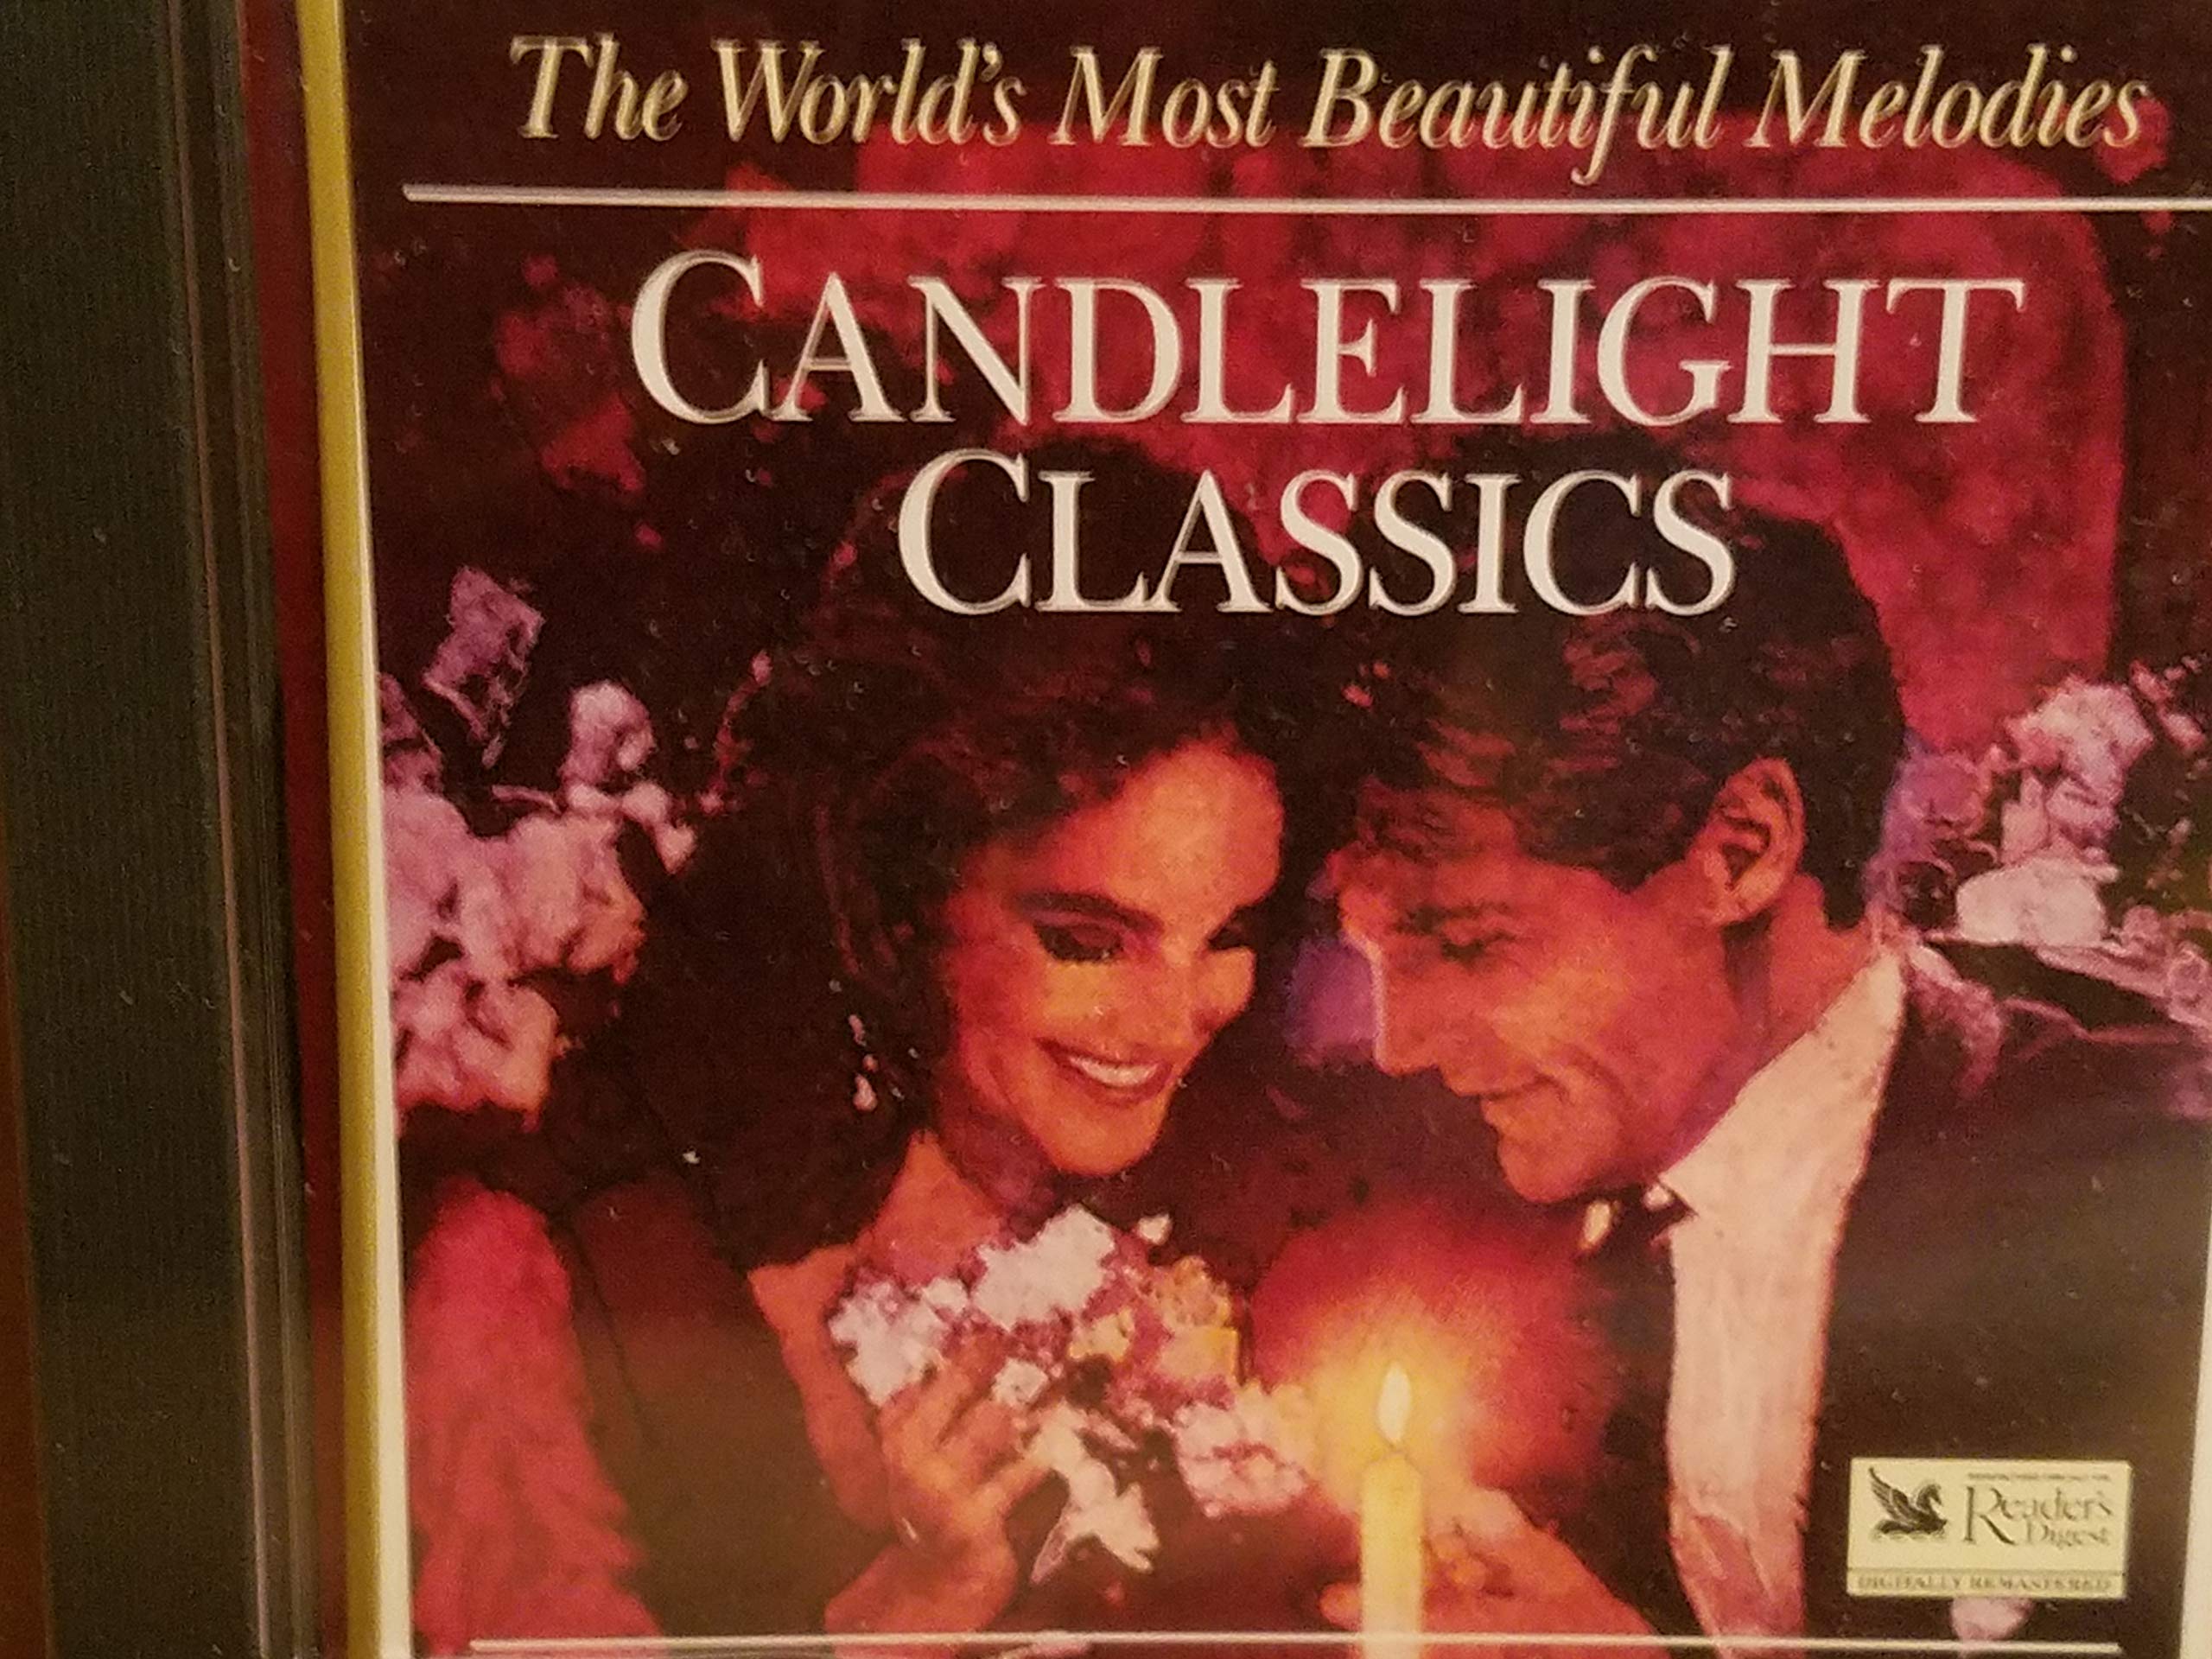 The London Promenade Orchestra-The Worlds Most Beautiful Melodies Candlelight Classics-CD-FLAC-1992-FLACME